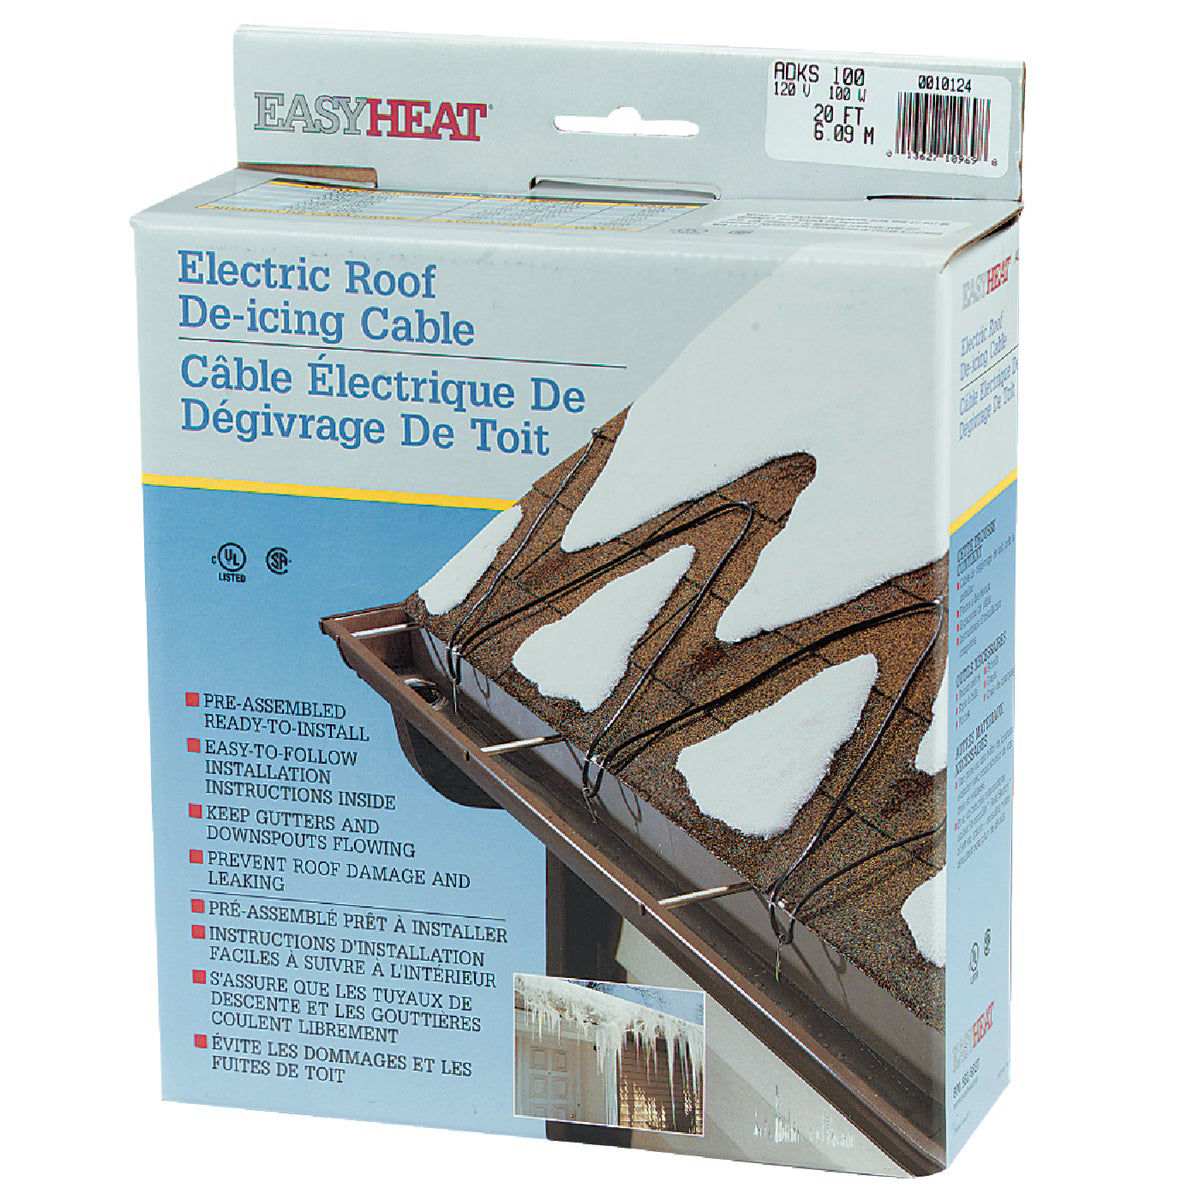 Easy Heat Adks 120 Ft. L De-Icing Cable For Roof And Gutter